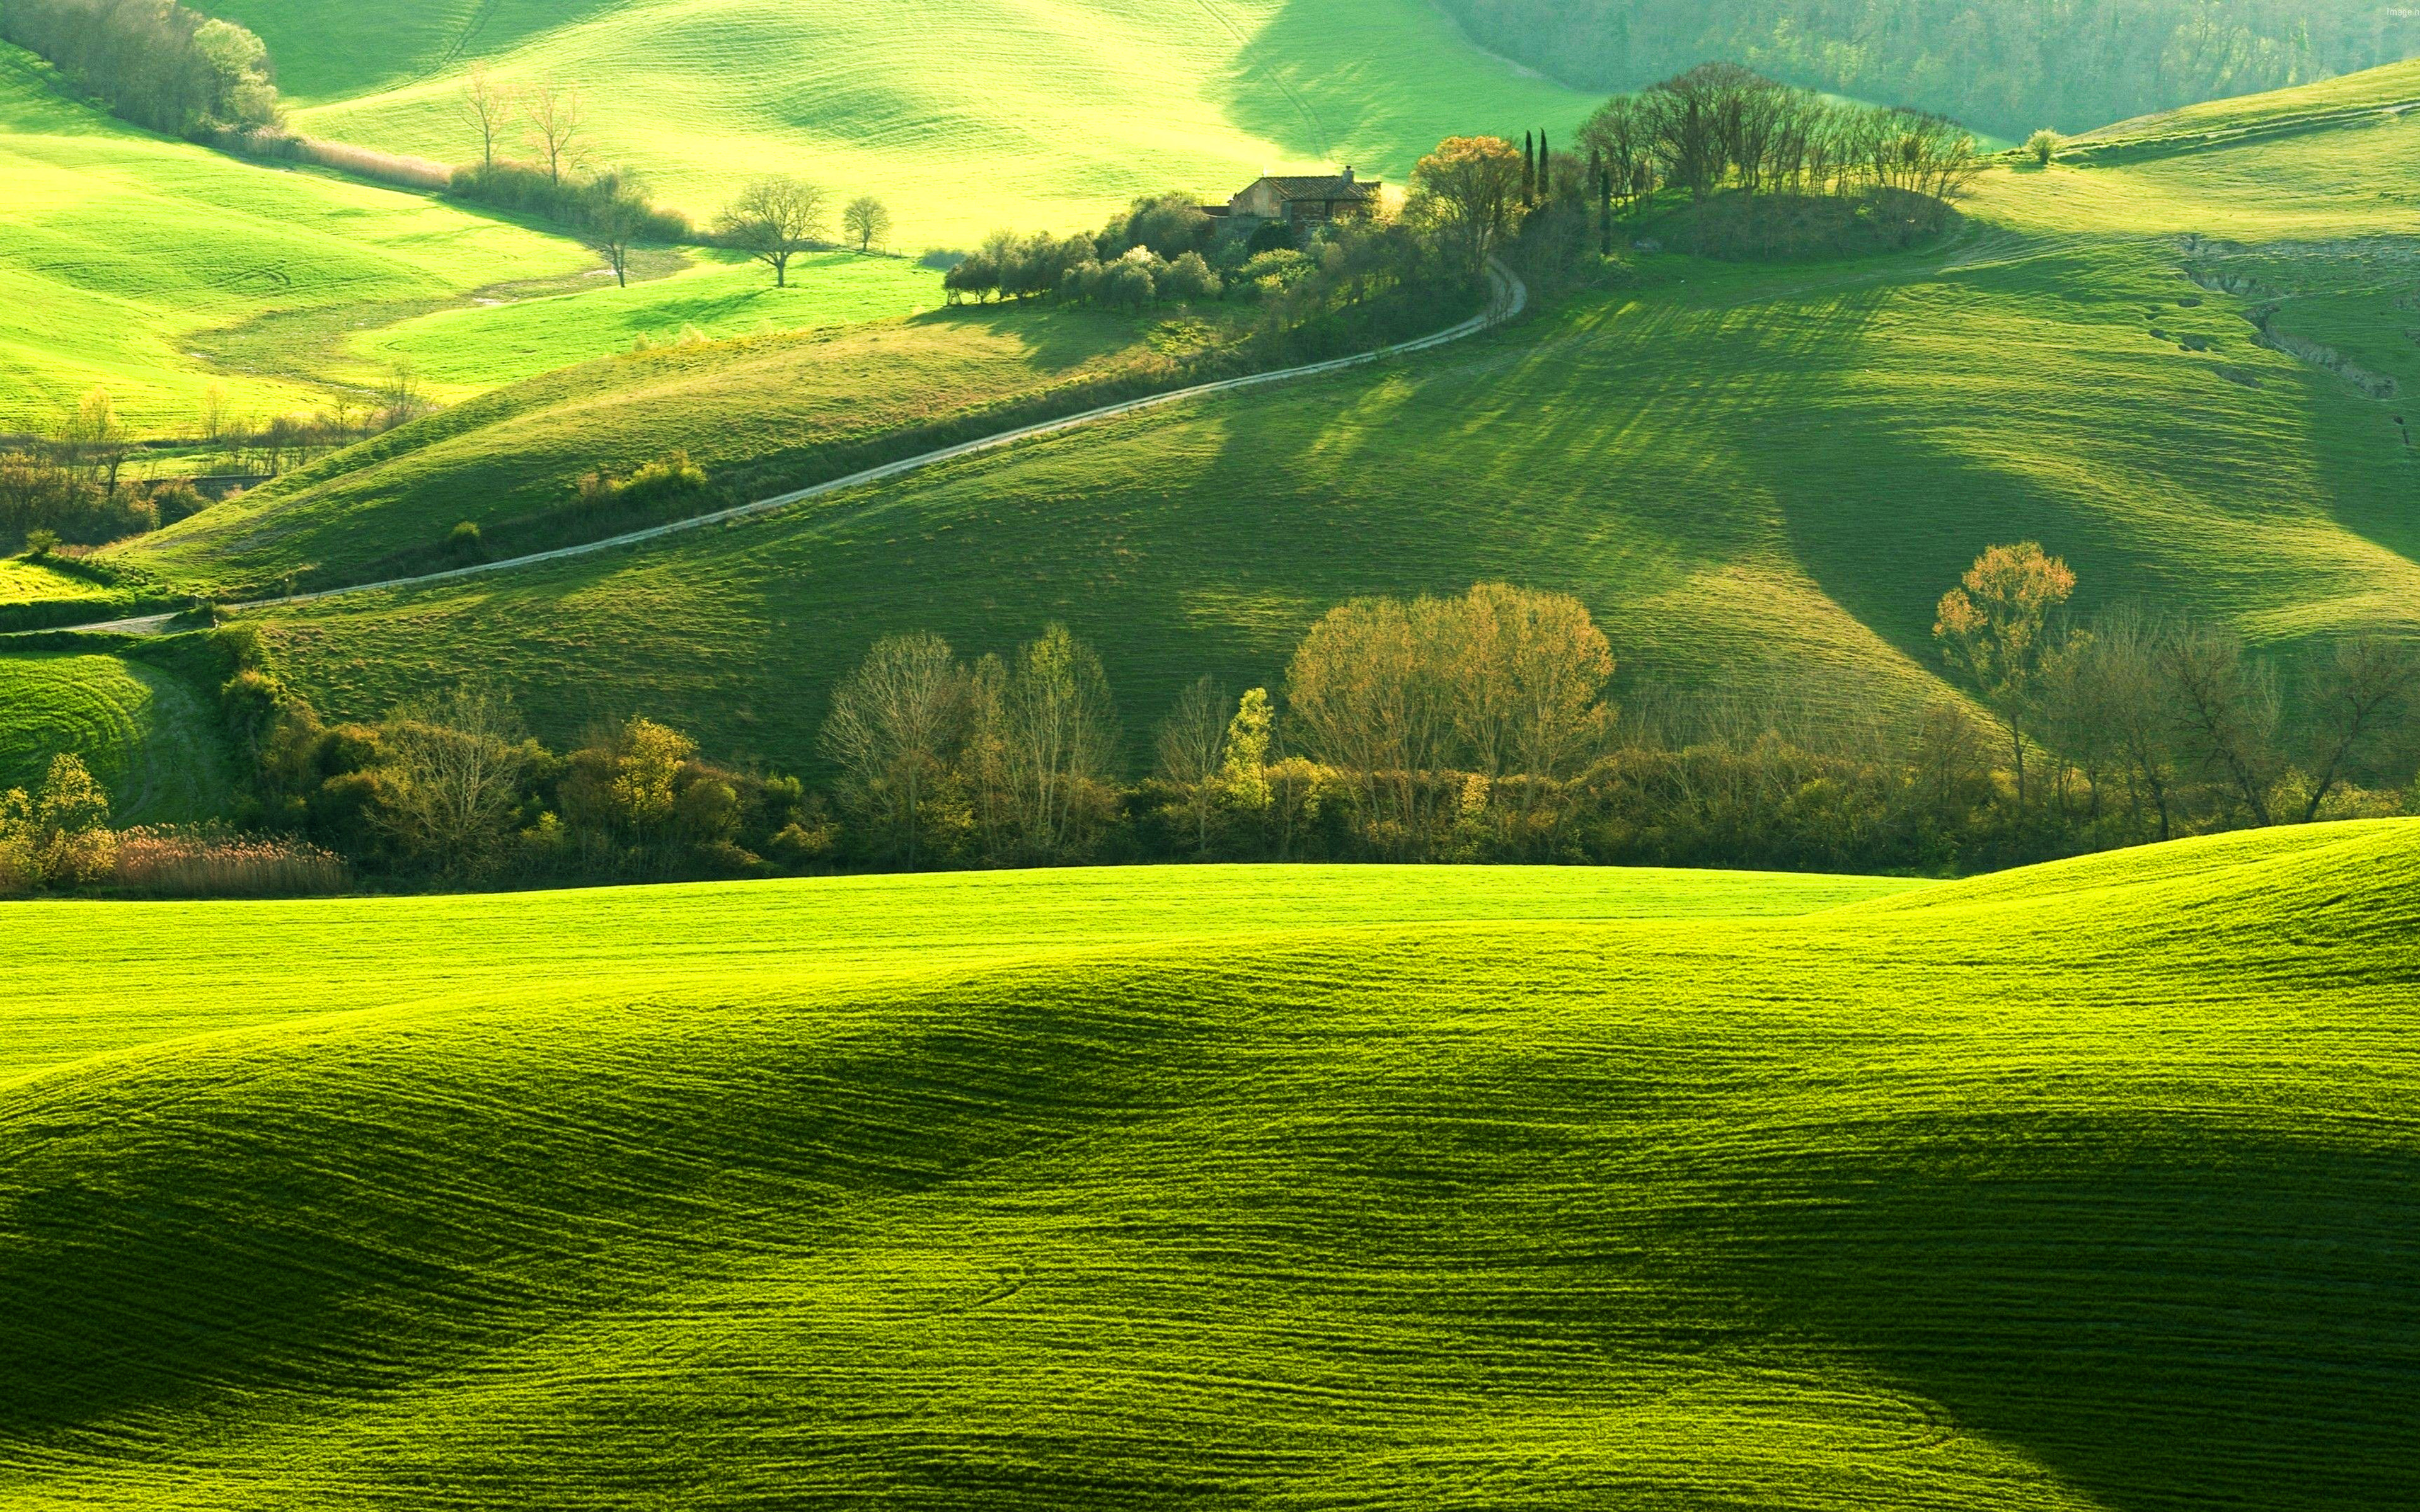 Download wallpaper Tuscany, 4k, summer, beautiful nature, green hills, Italy, Europe for desktop with resolution 3840x2400. High Quality HD picture wallpaper